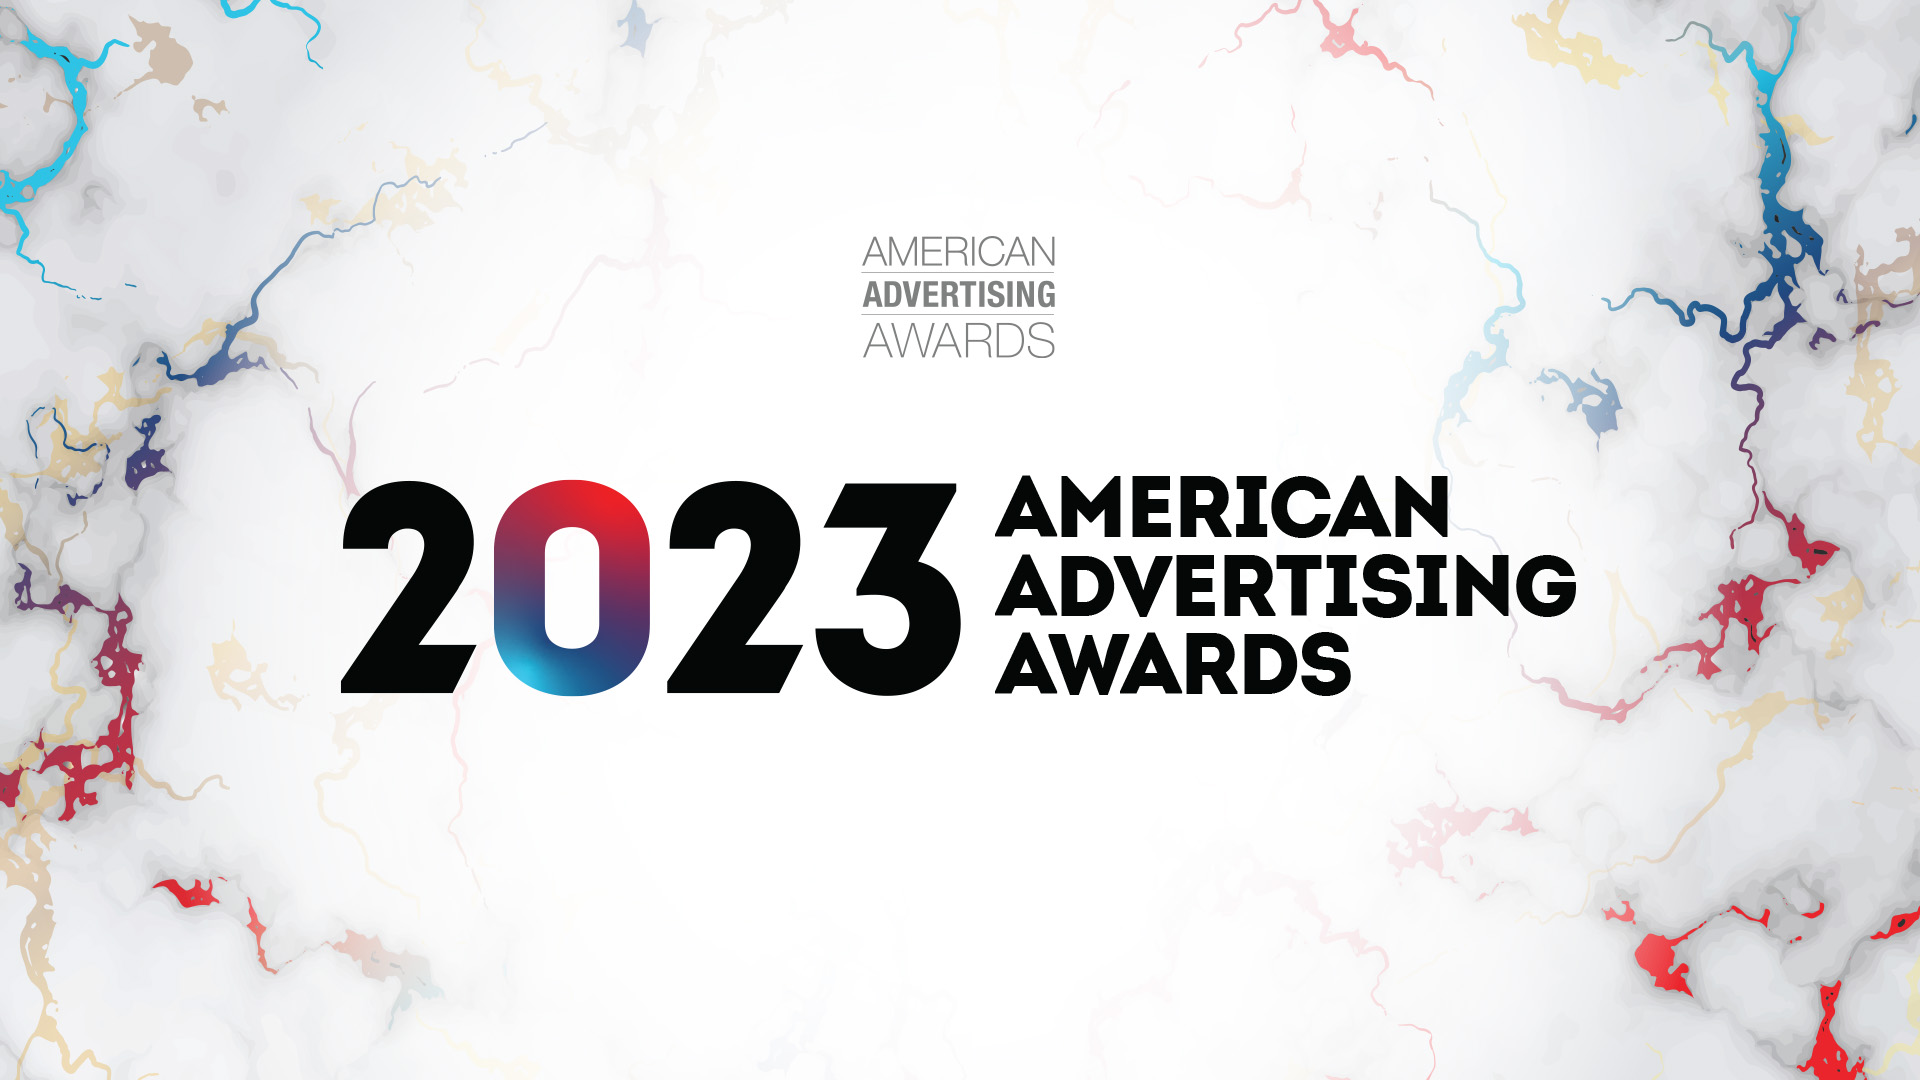 AAFCM Presents the 2023 American Advertising Awards